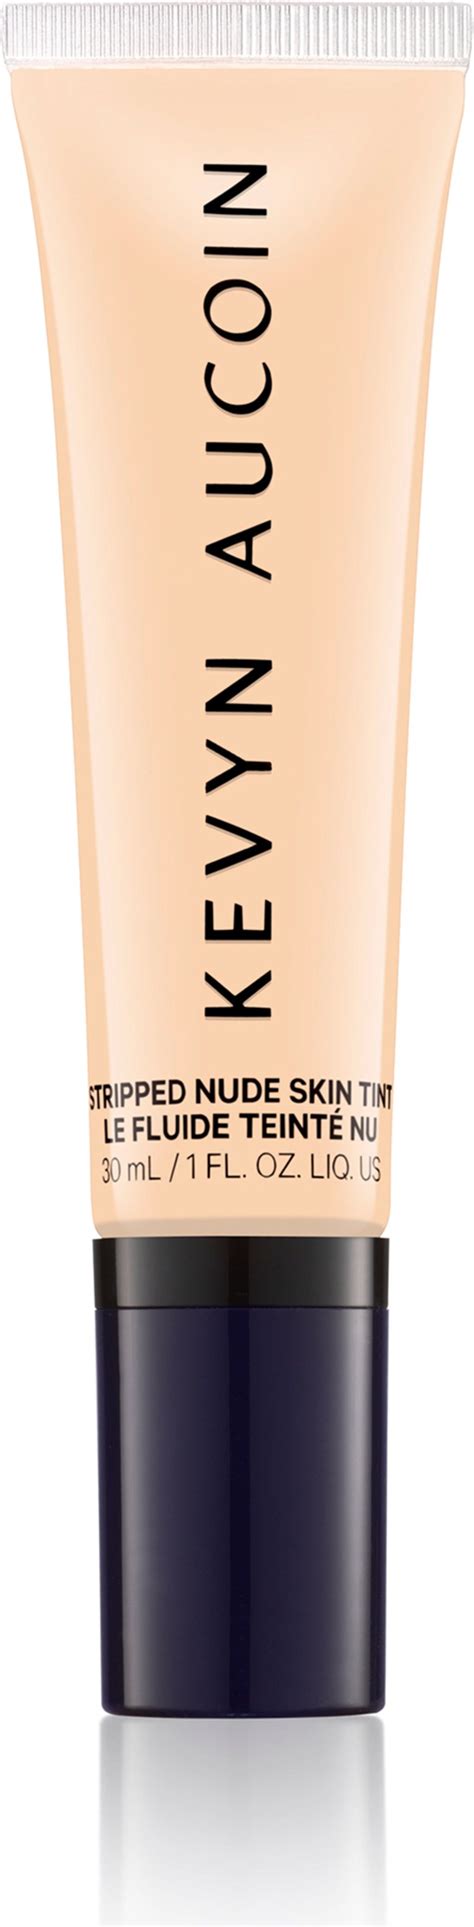 Kevyn Aucoin Stripped Nude Skin Tint Cosmeterie Online Shop